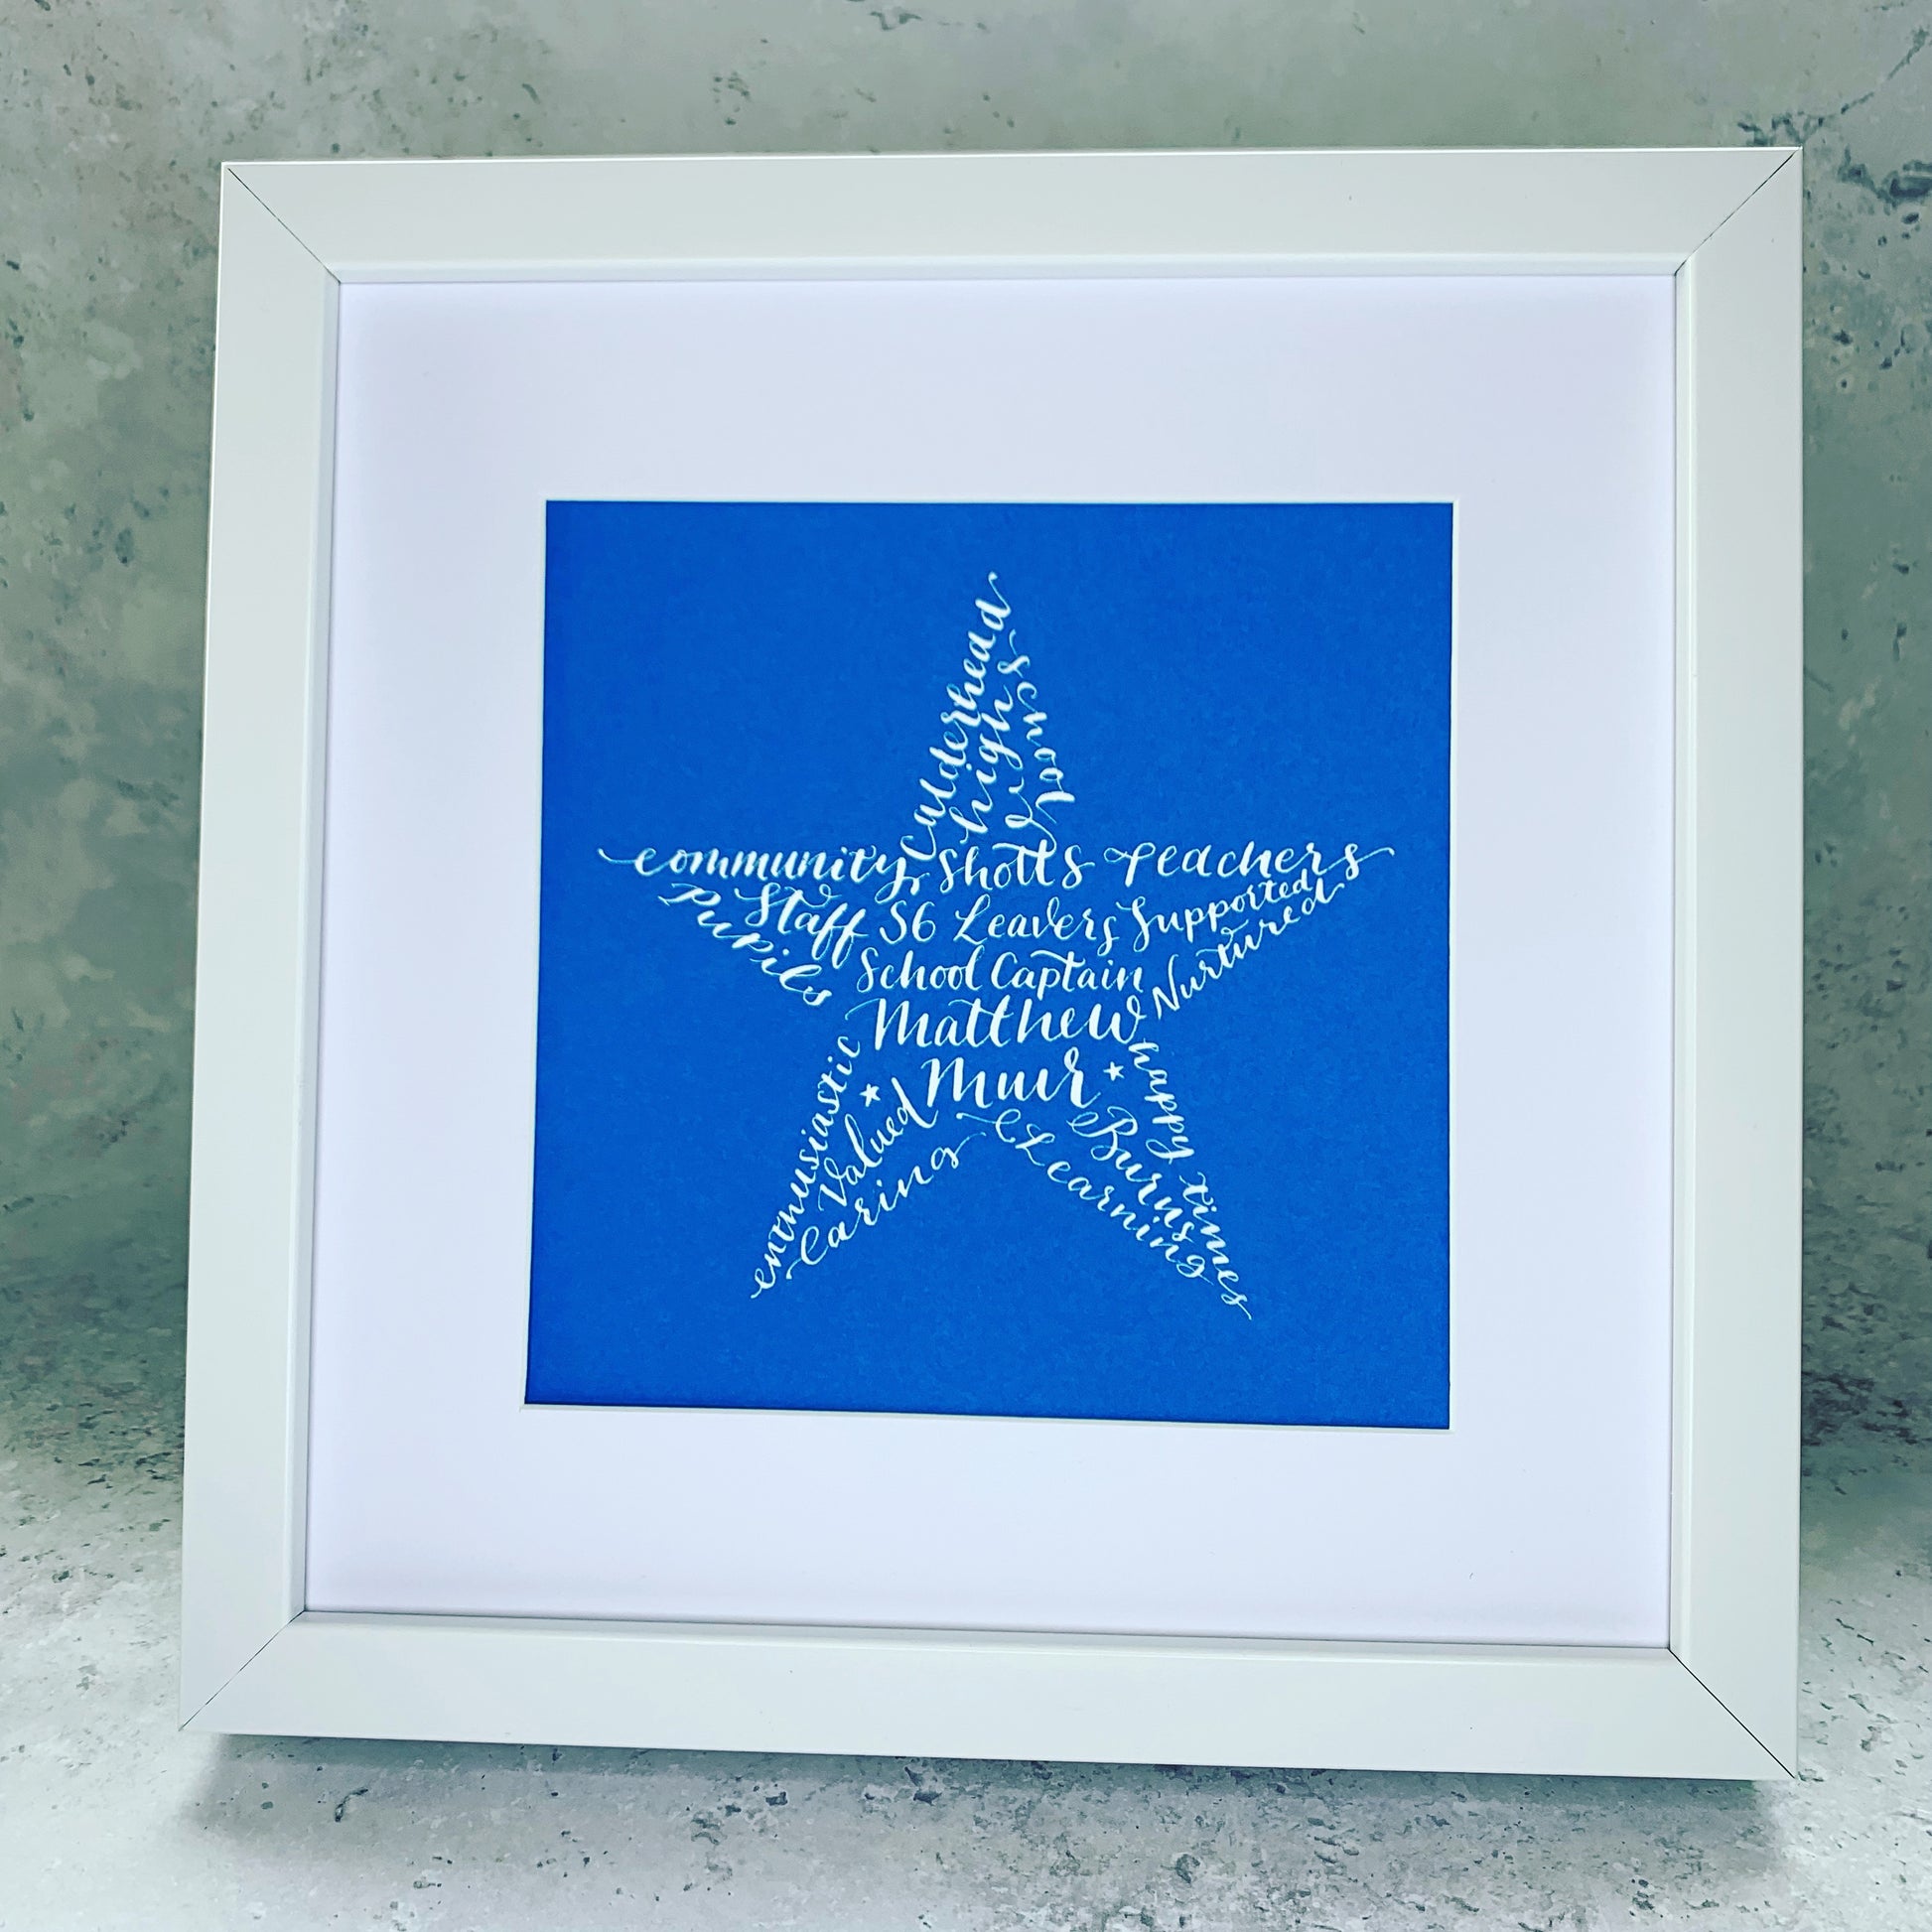 white square picture frame with white mount filled with blue card. white ink calligraphy making up star shape